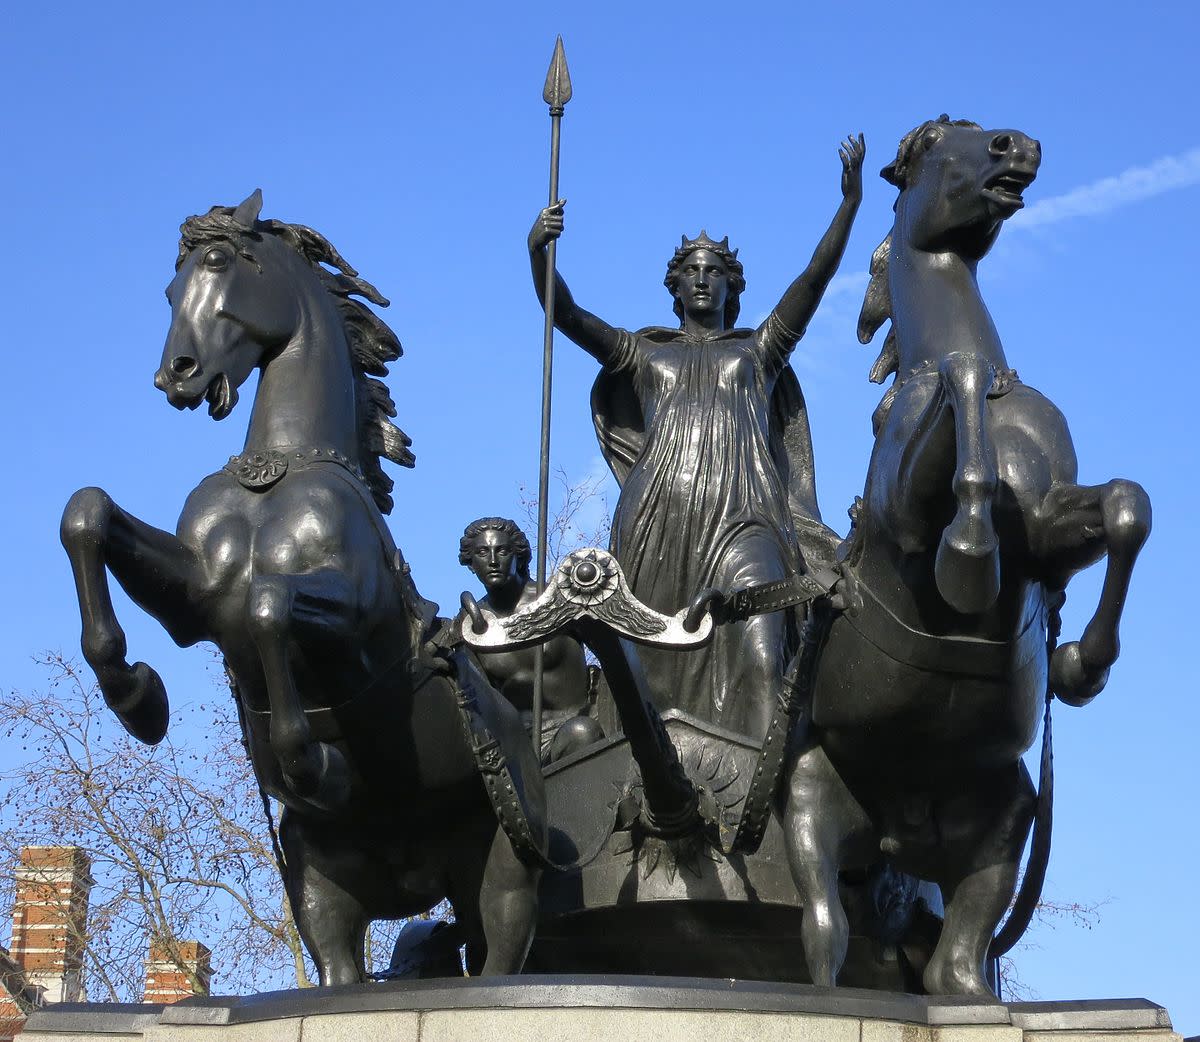 Boudicca and her daughters. Not a true Brit.